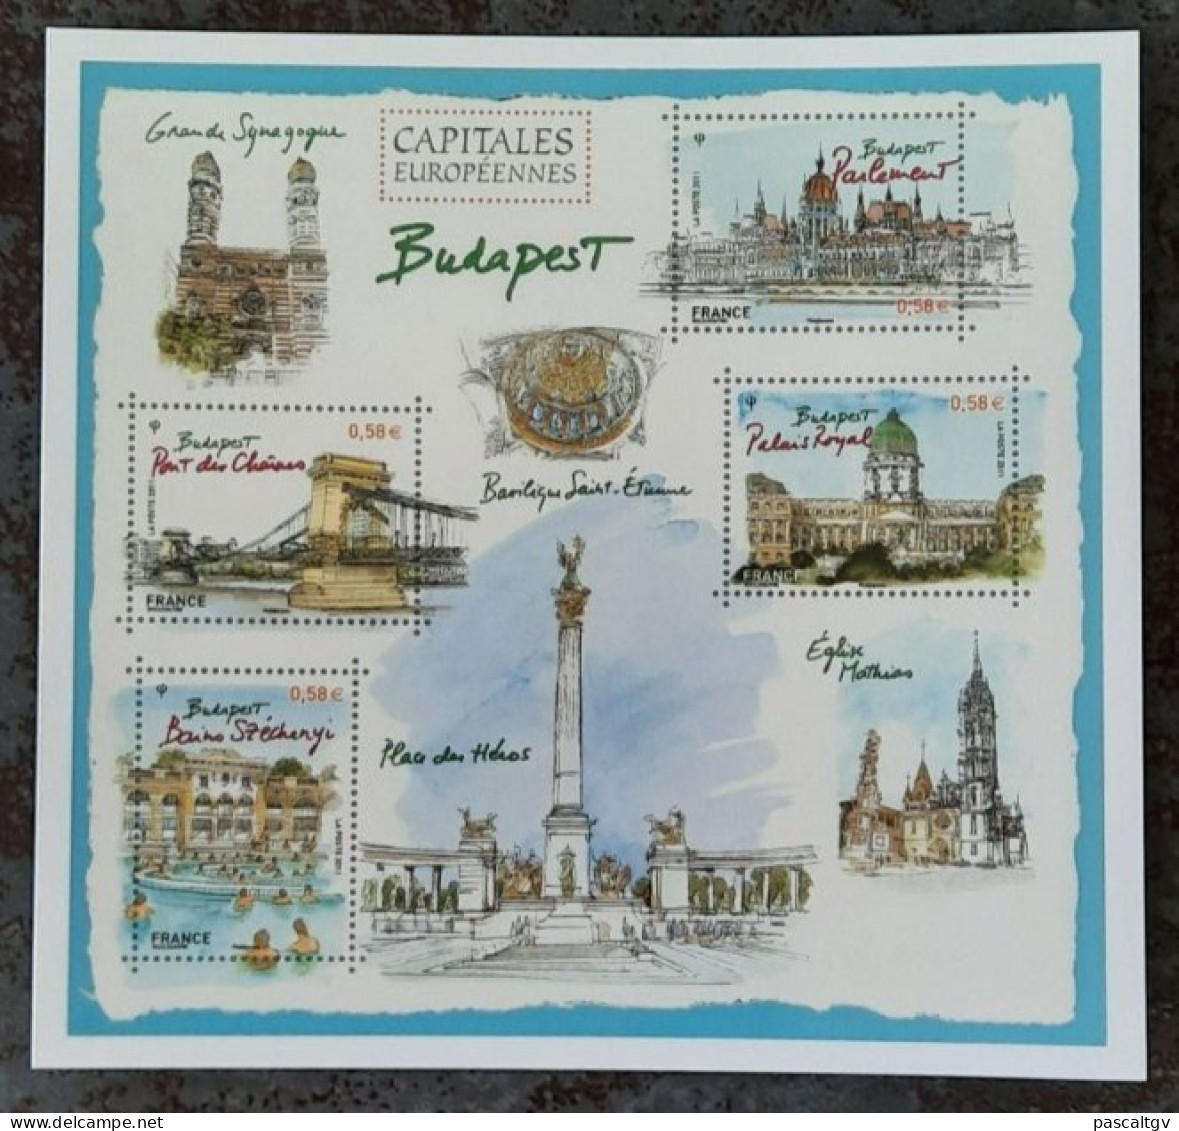 2011 - Entier Postal International - 20gr (1,96 Euro) - ** BUDAPEST Capitale Européenne ** - 4538 - LUXE - - Documents Of Postal Services